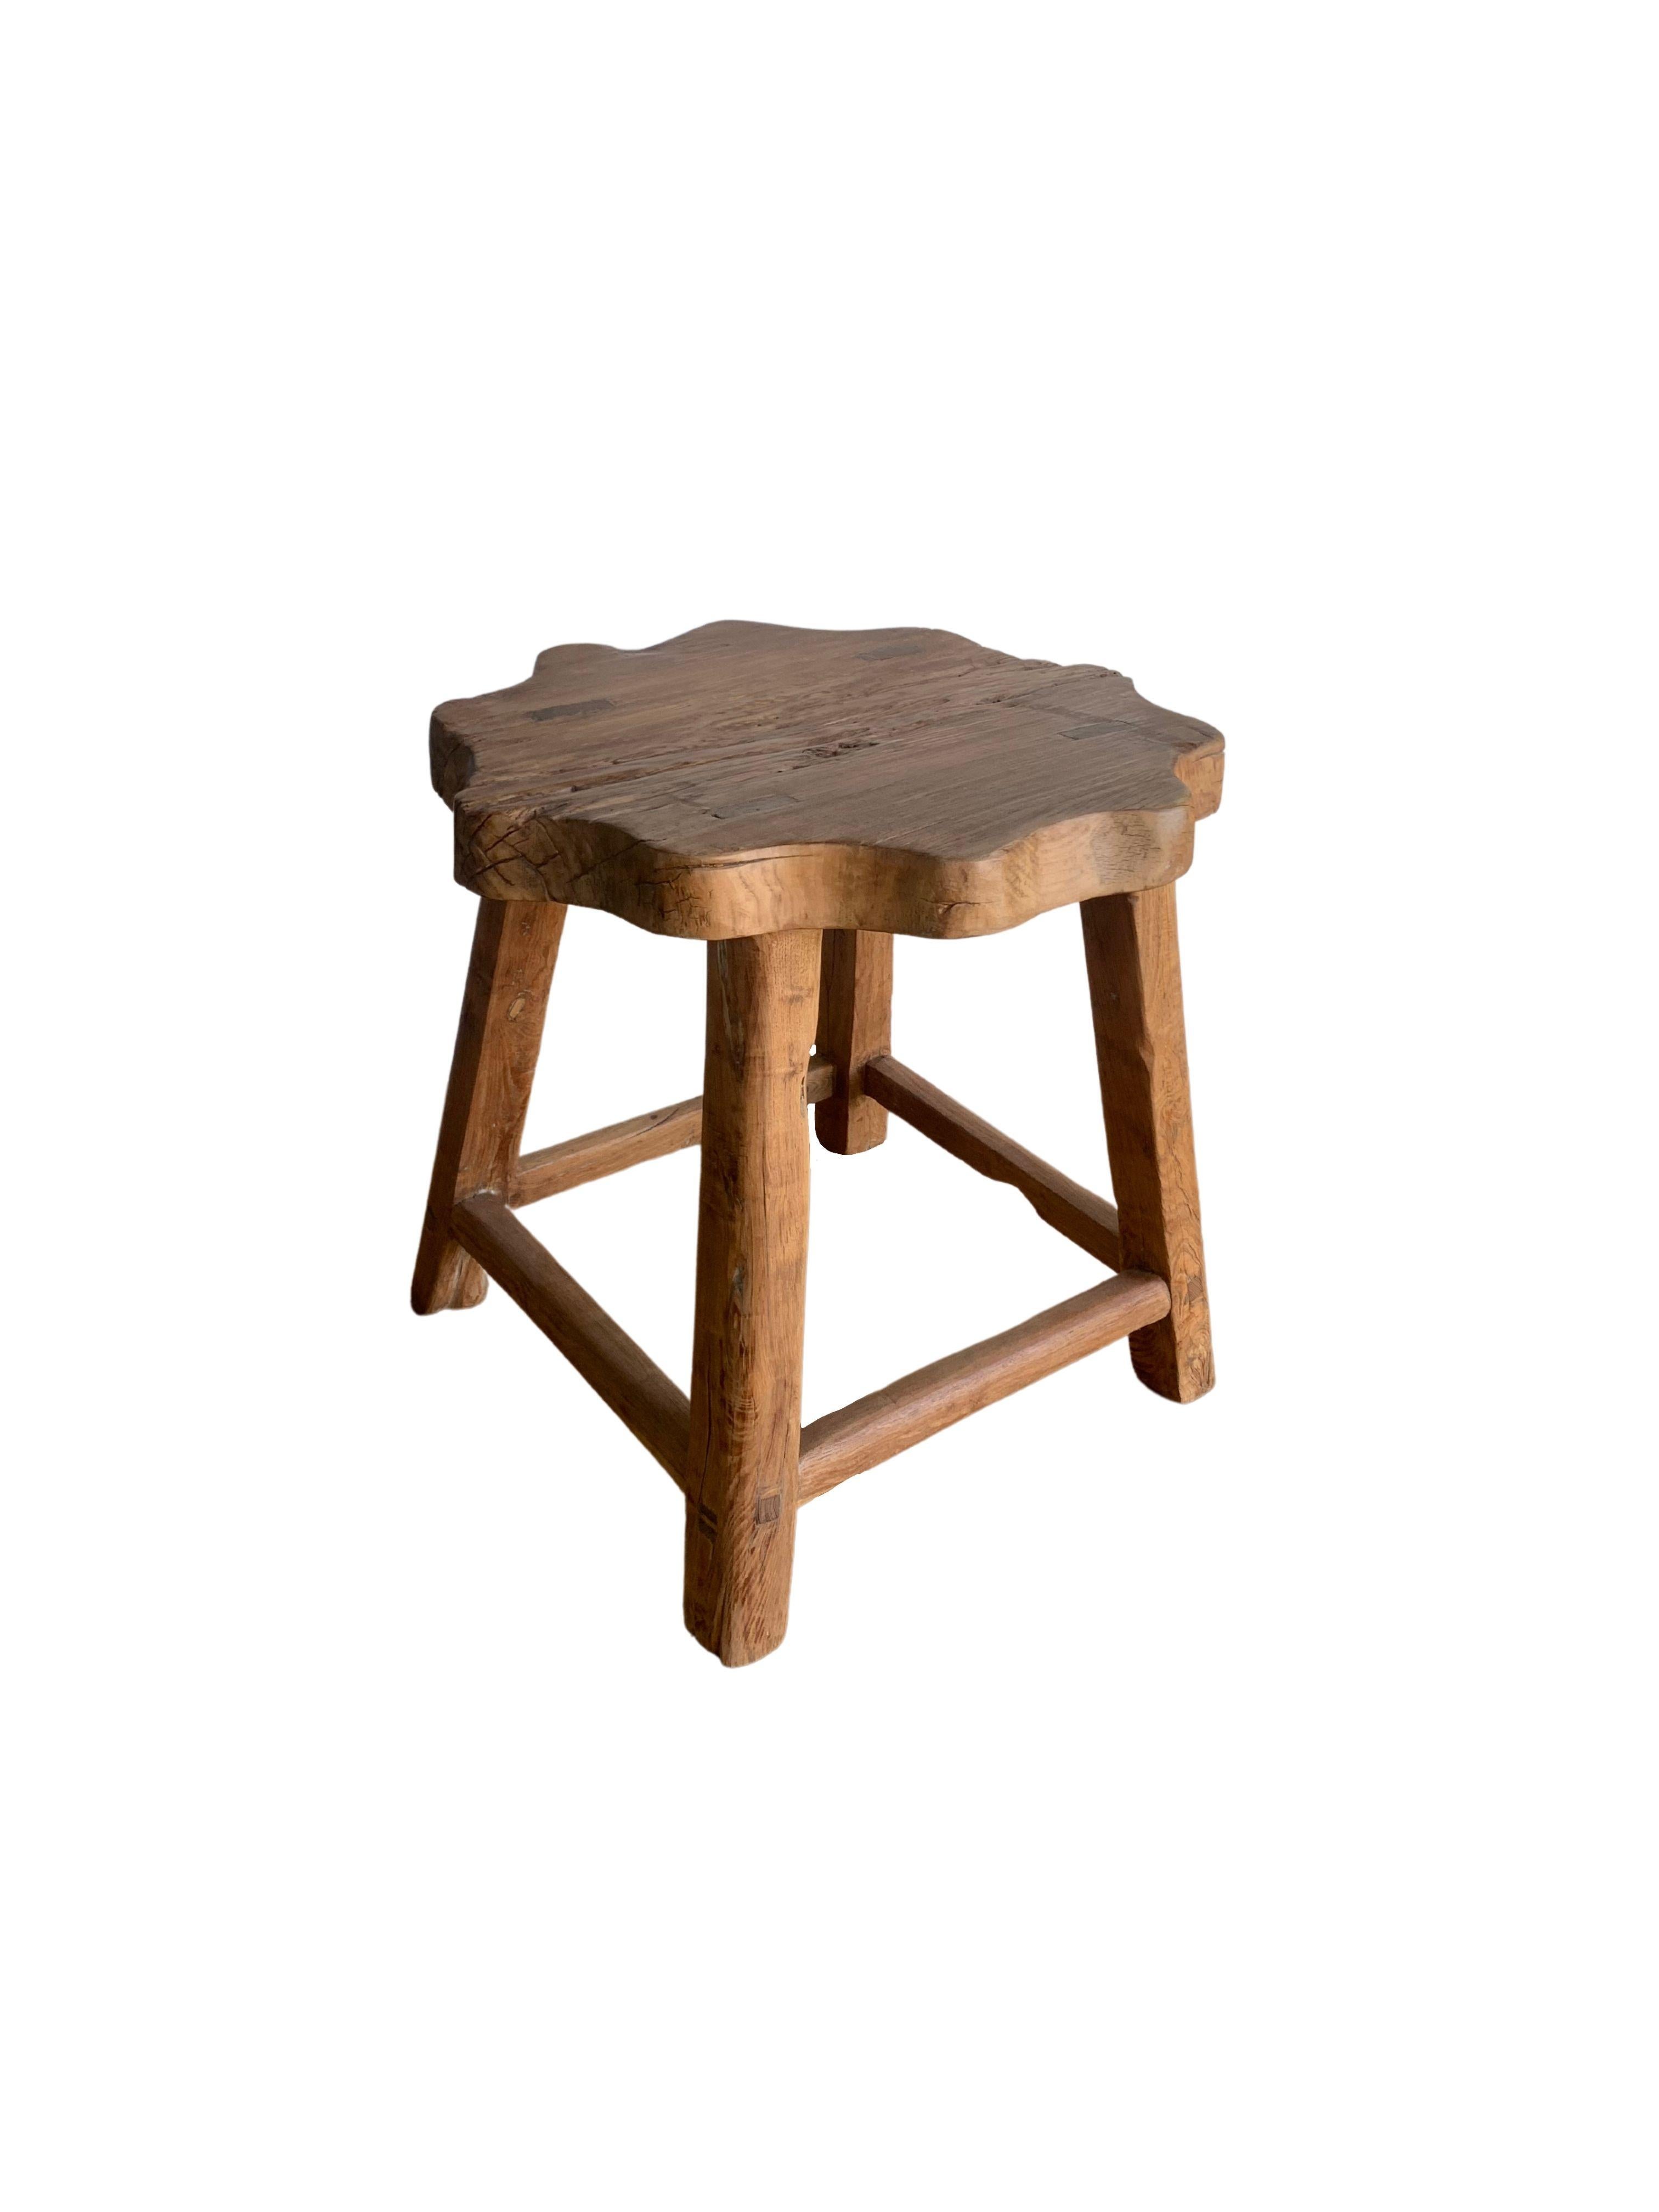 Hand-Carved Vintage Chinese Elm Wood Stool with Warm Wood Texture